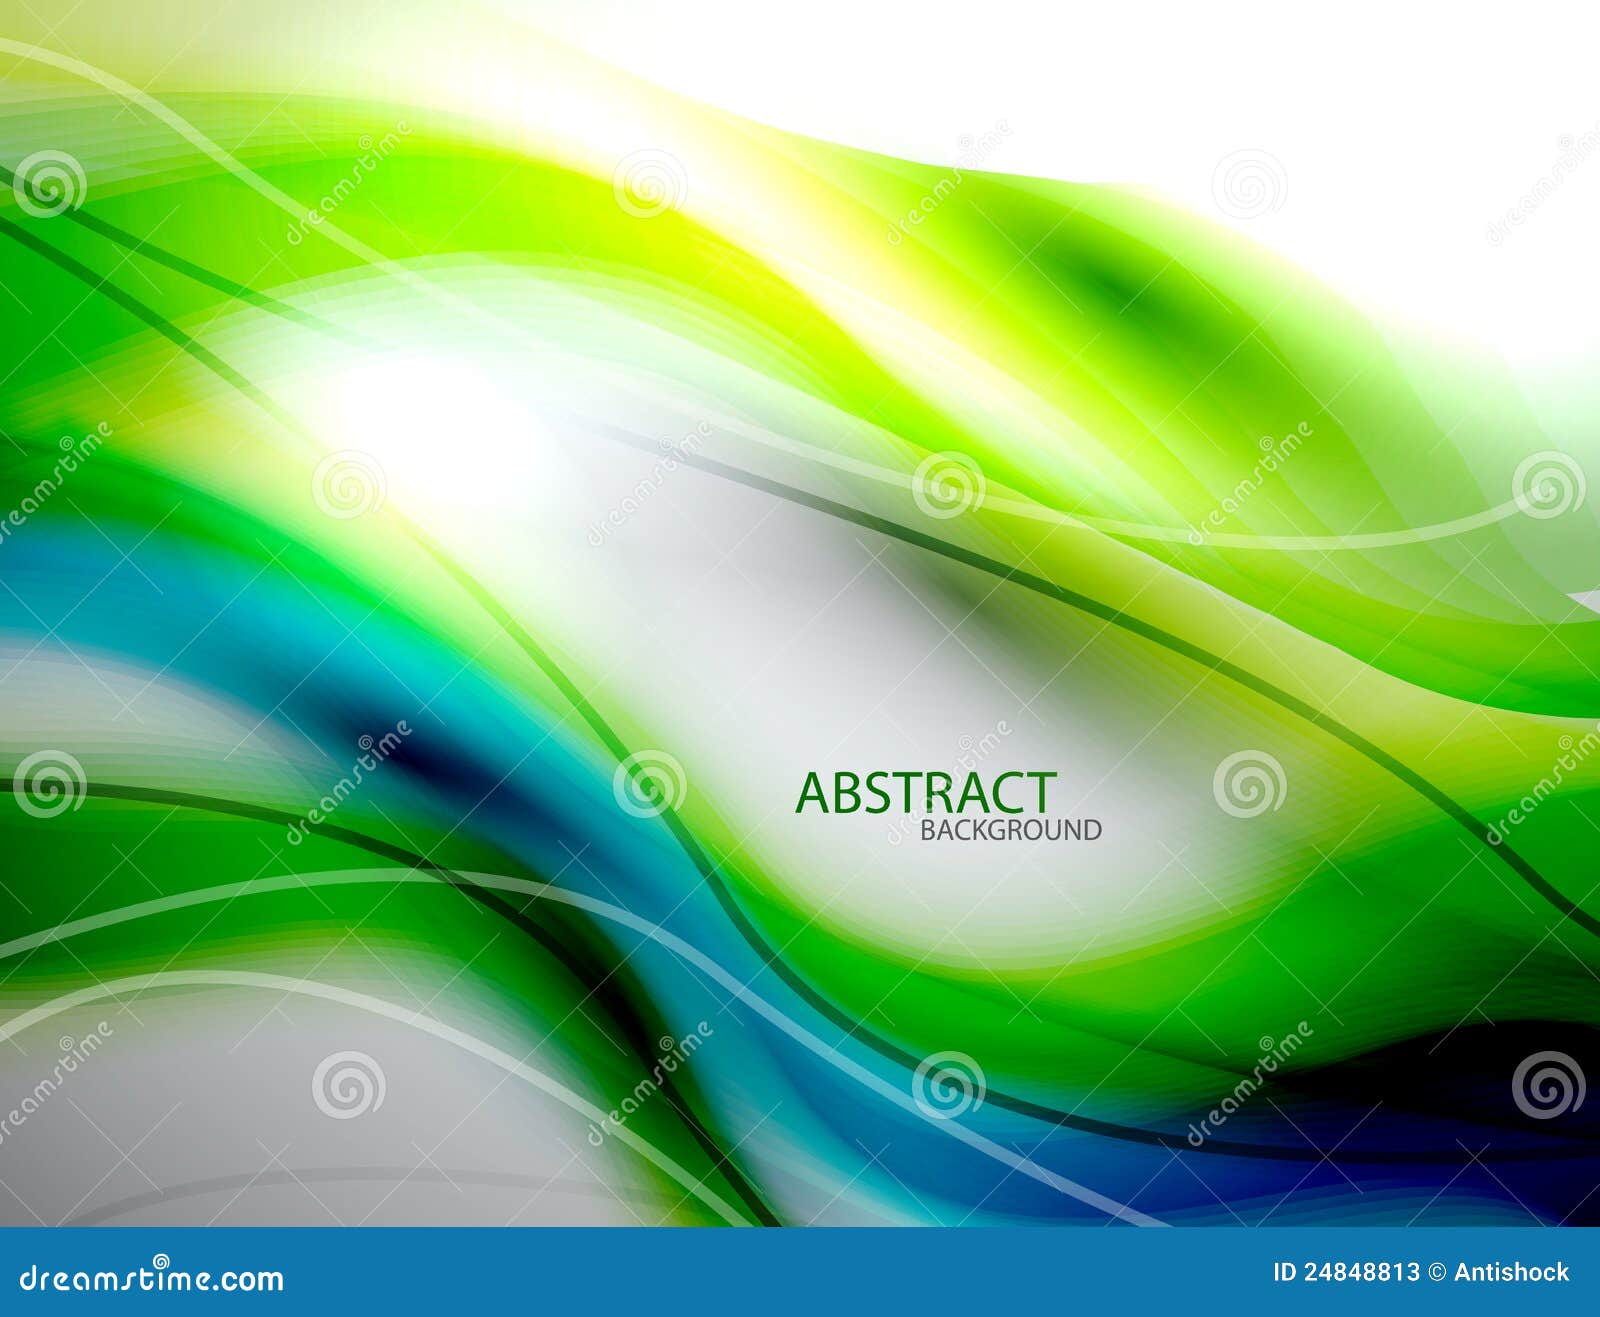 Abstract blue and green color background Vector Image